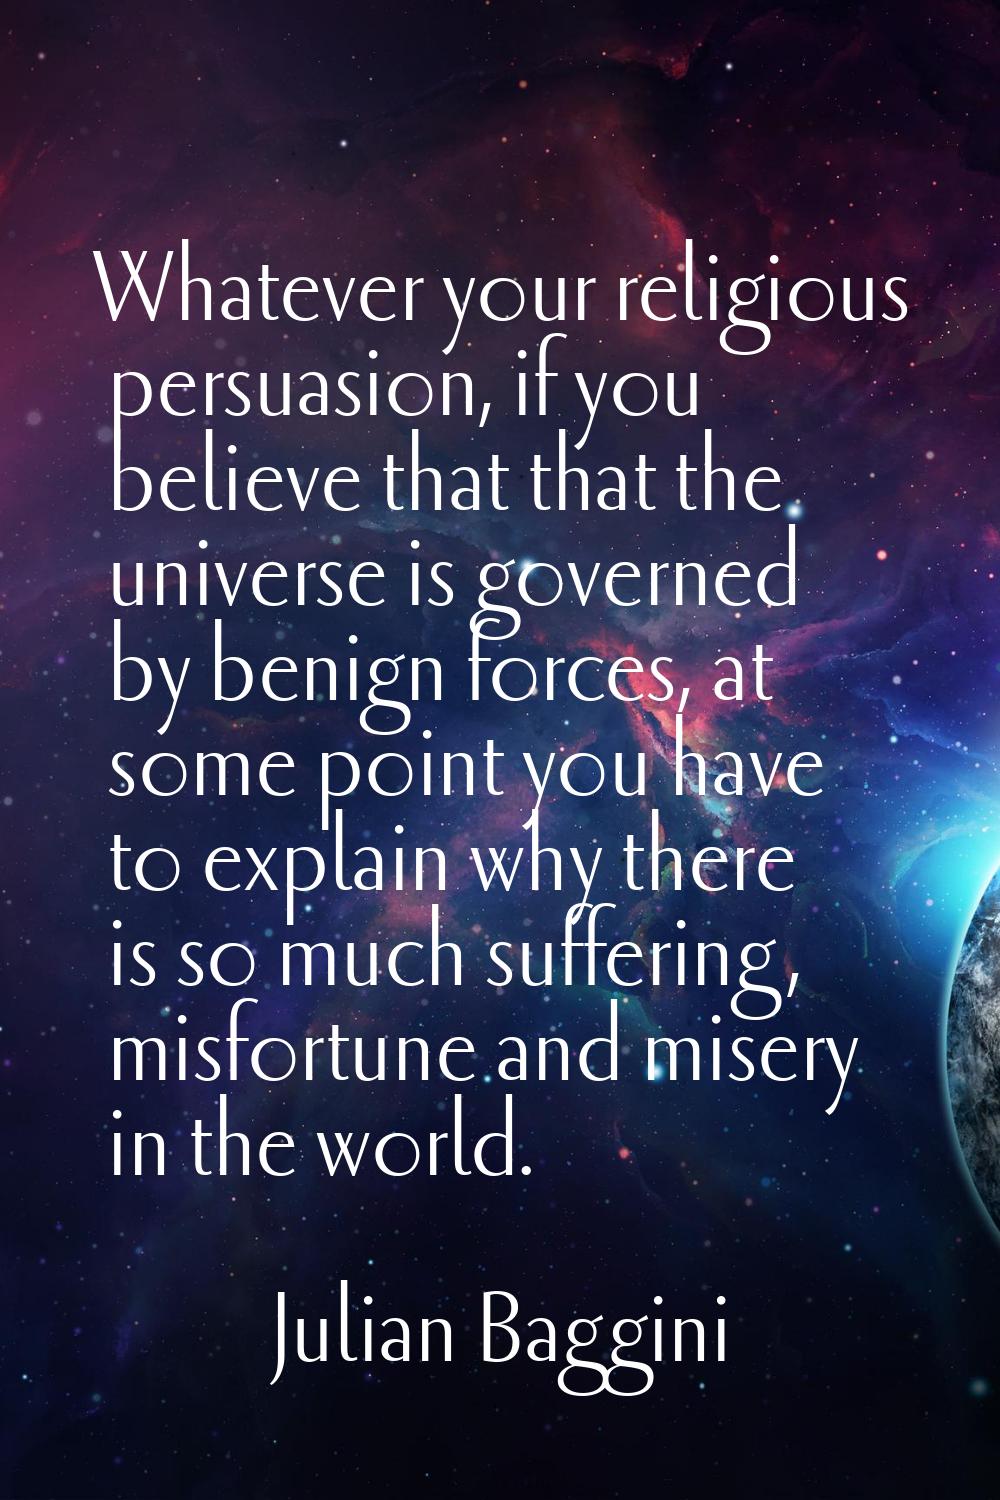 Whatever your religious persuasion, if you believe that that the universe is governed by benign for